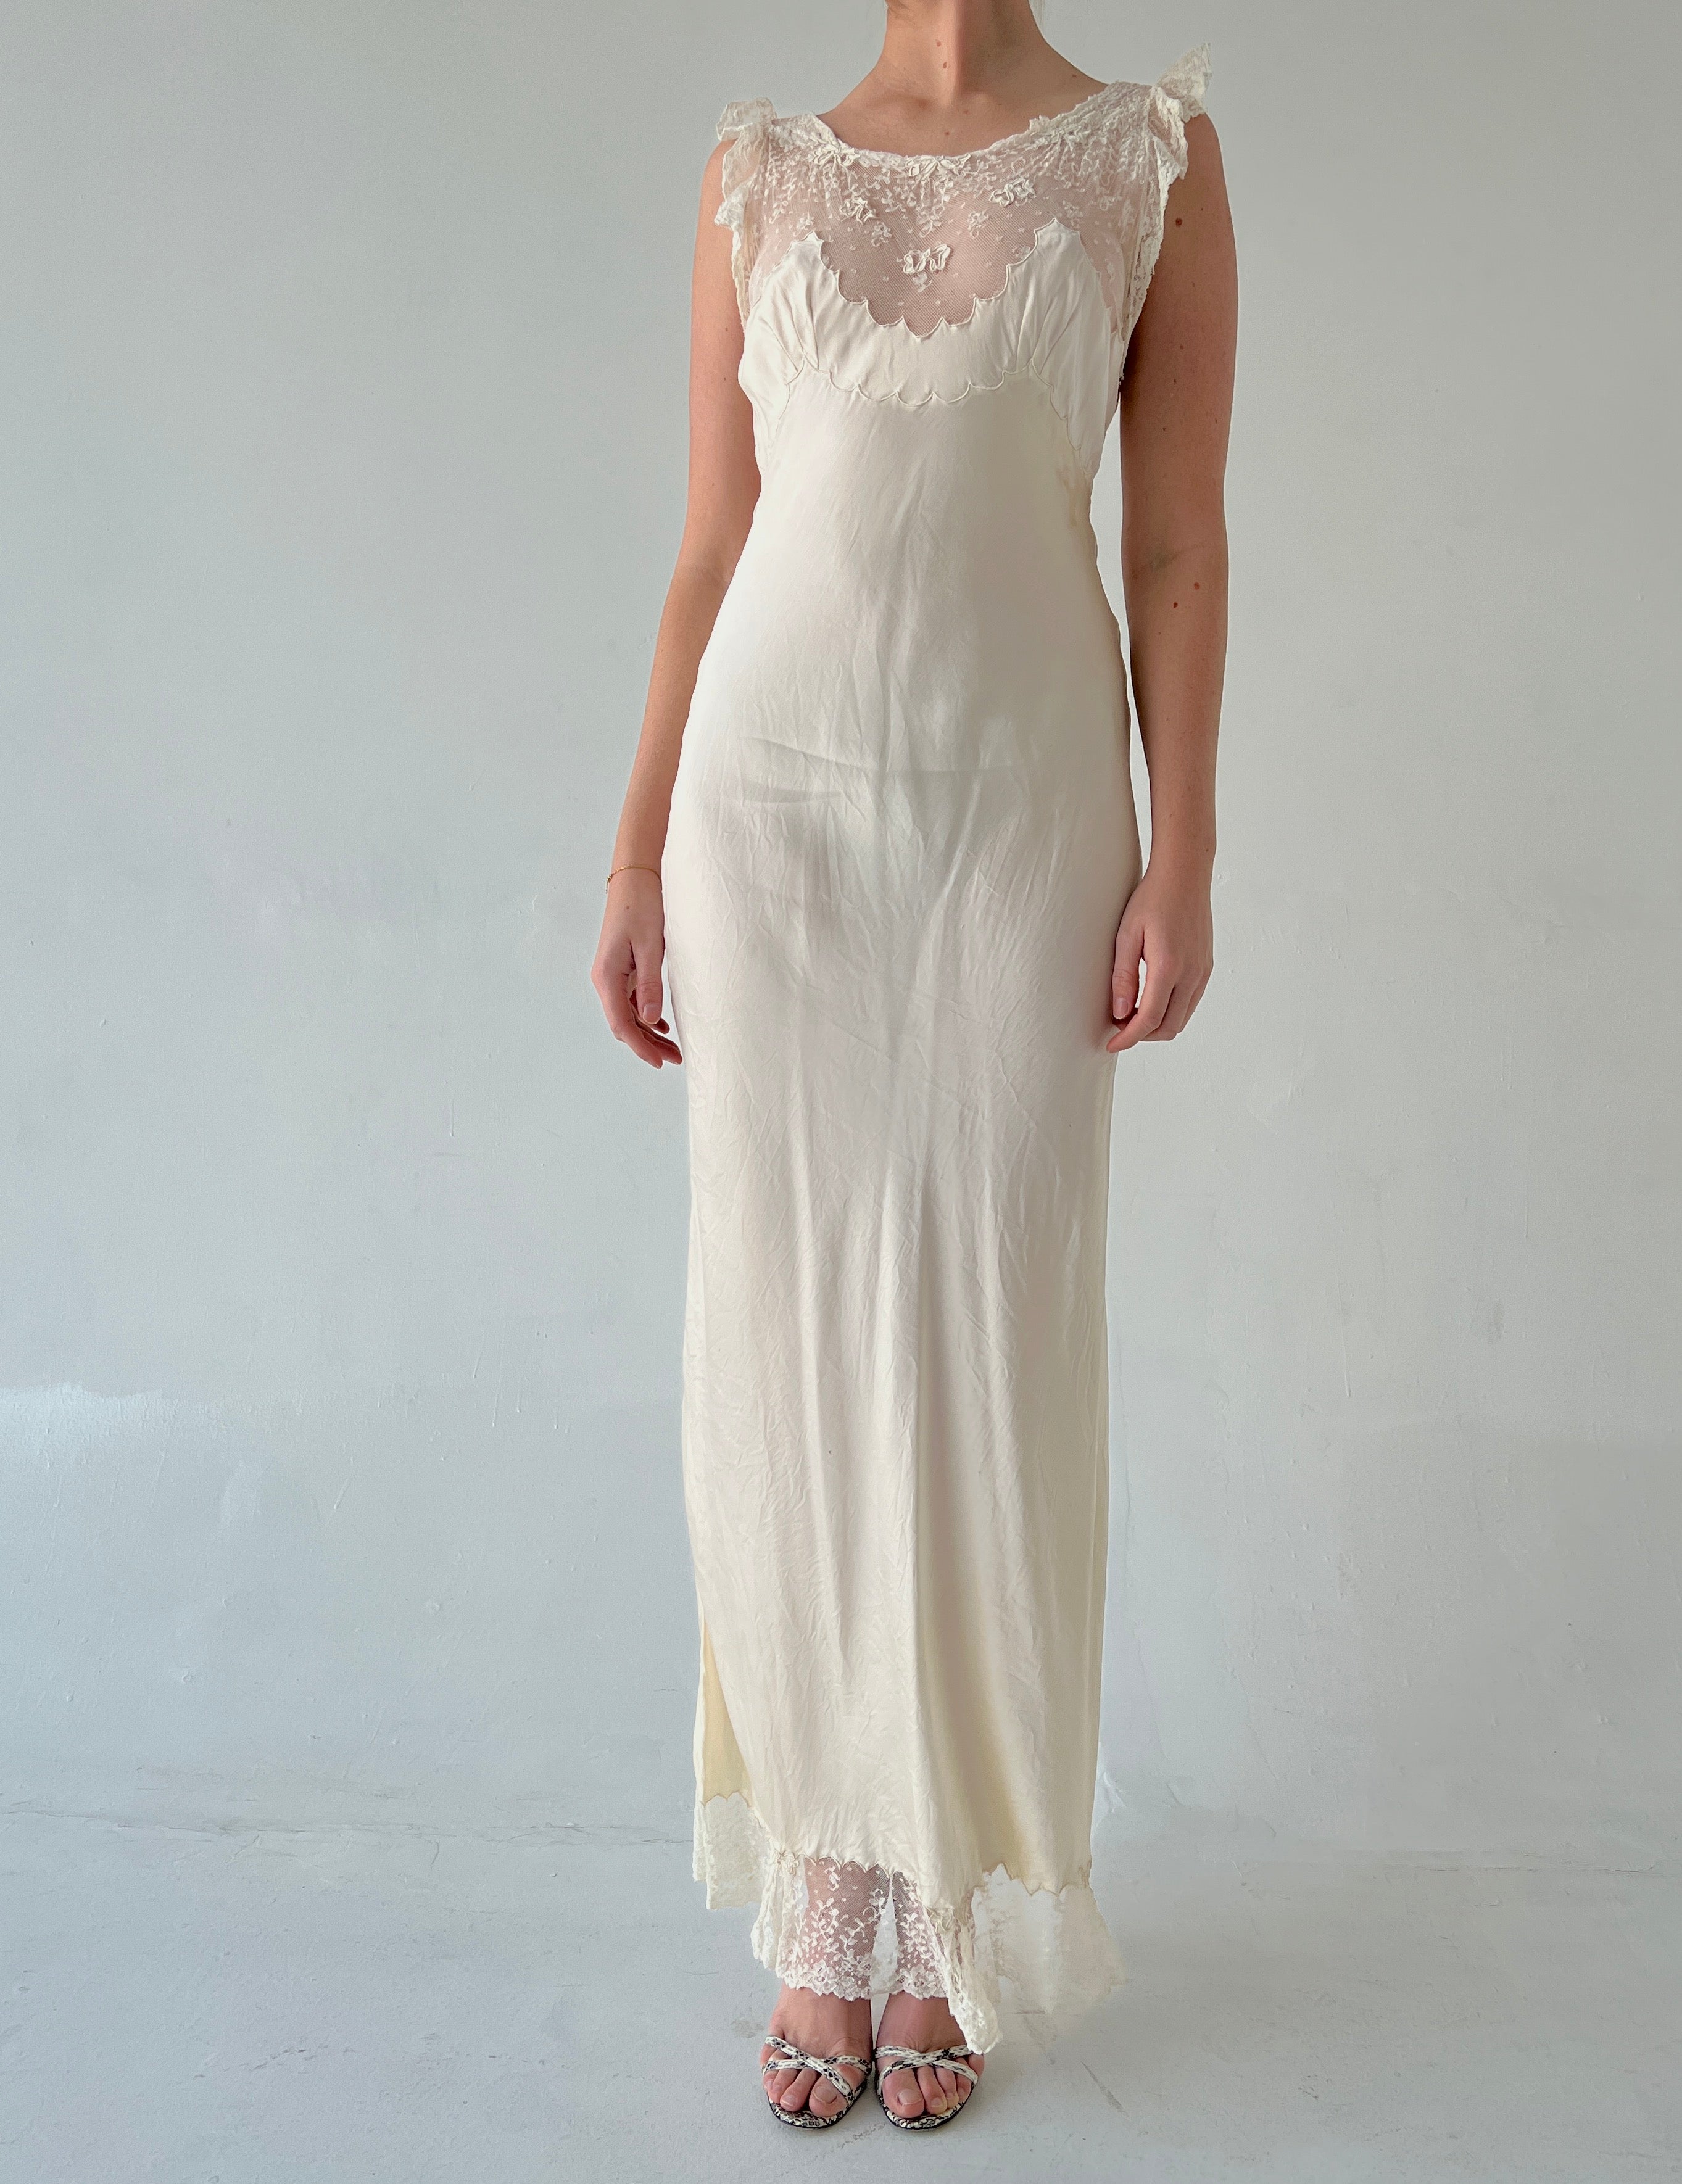 1930's Silk Slip with Lace and Bow Embroidery